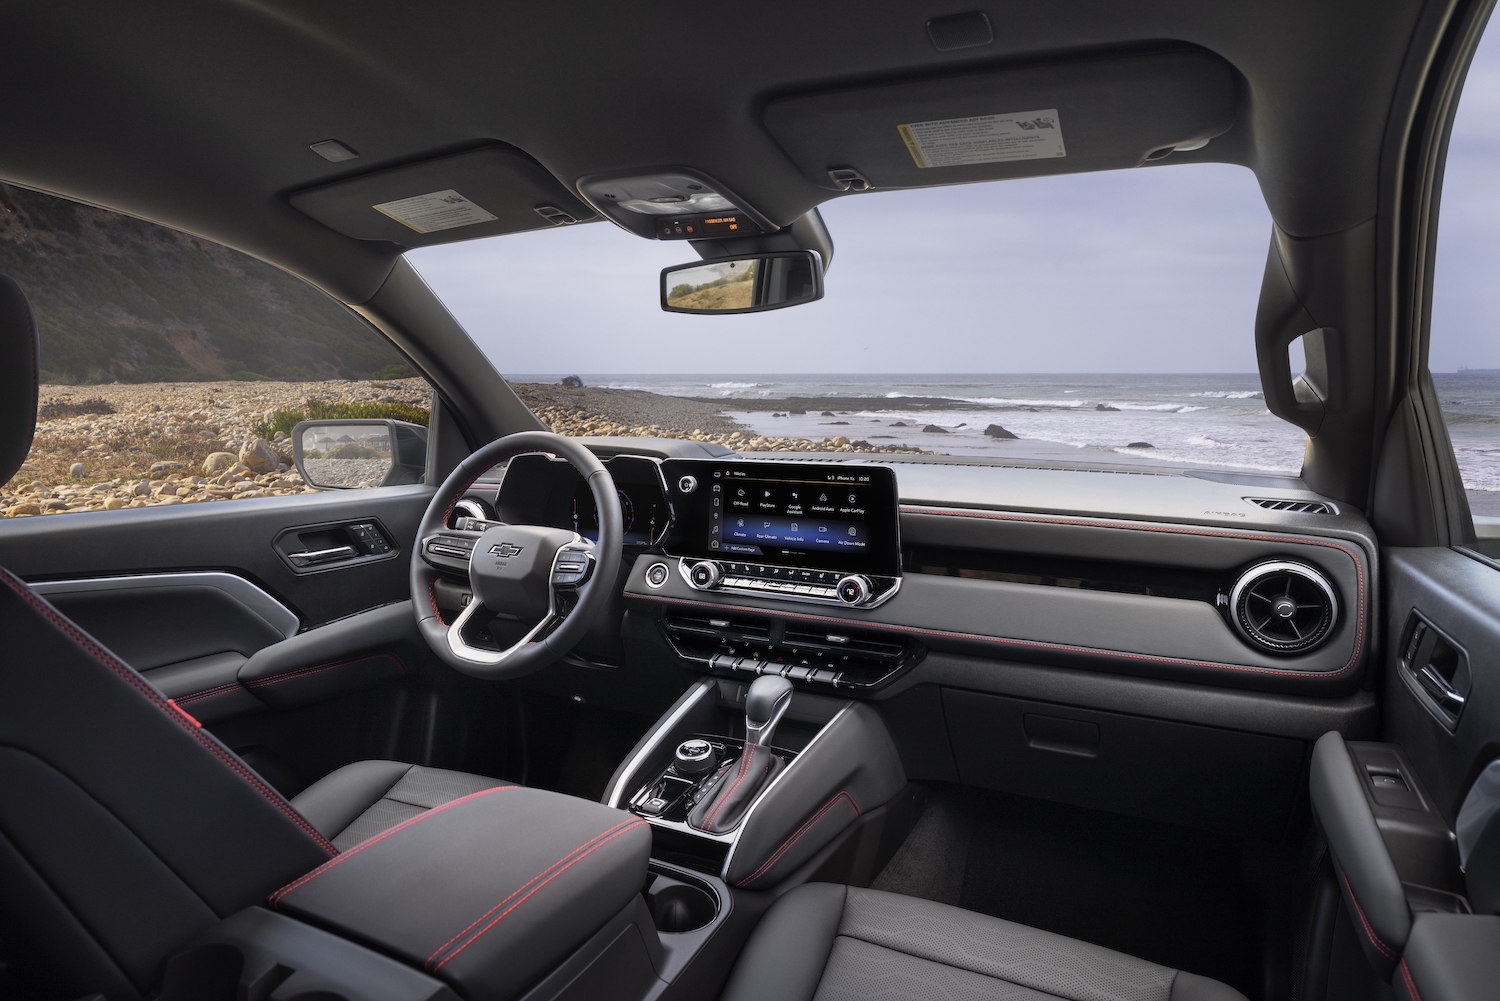 Interior of the 2023 Chevrolet Colorado from the front passenger seat with the ocean in the back.